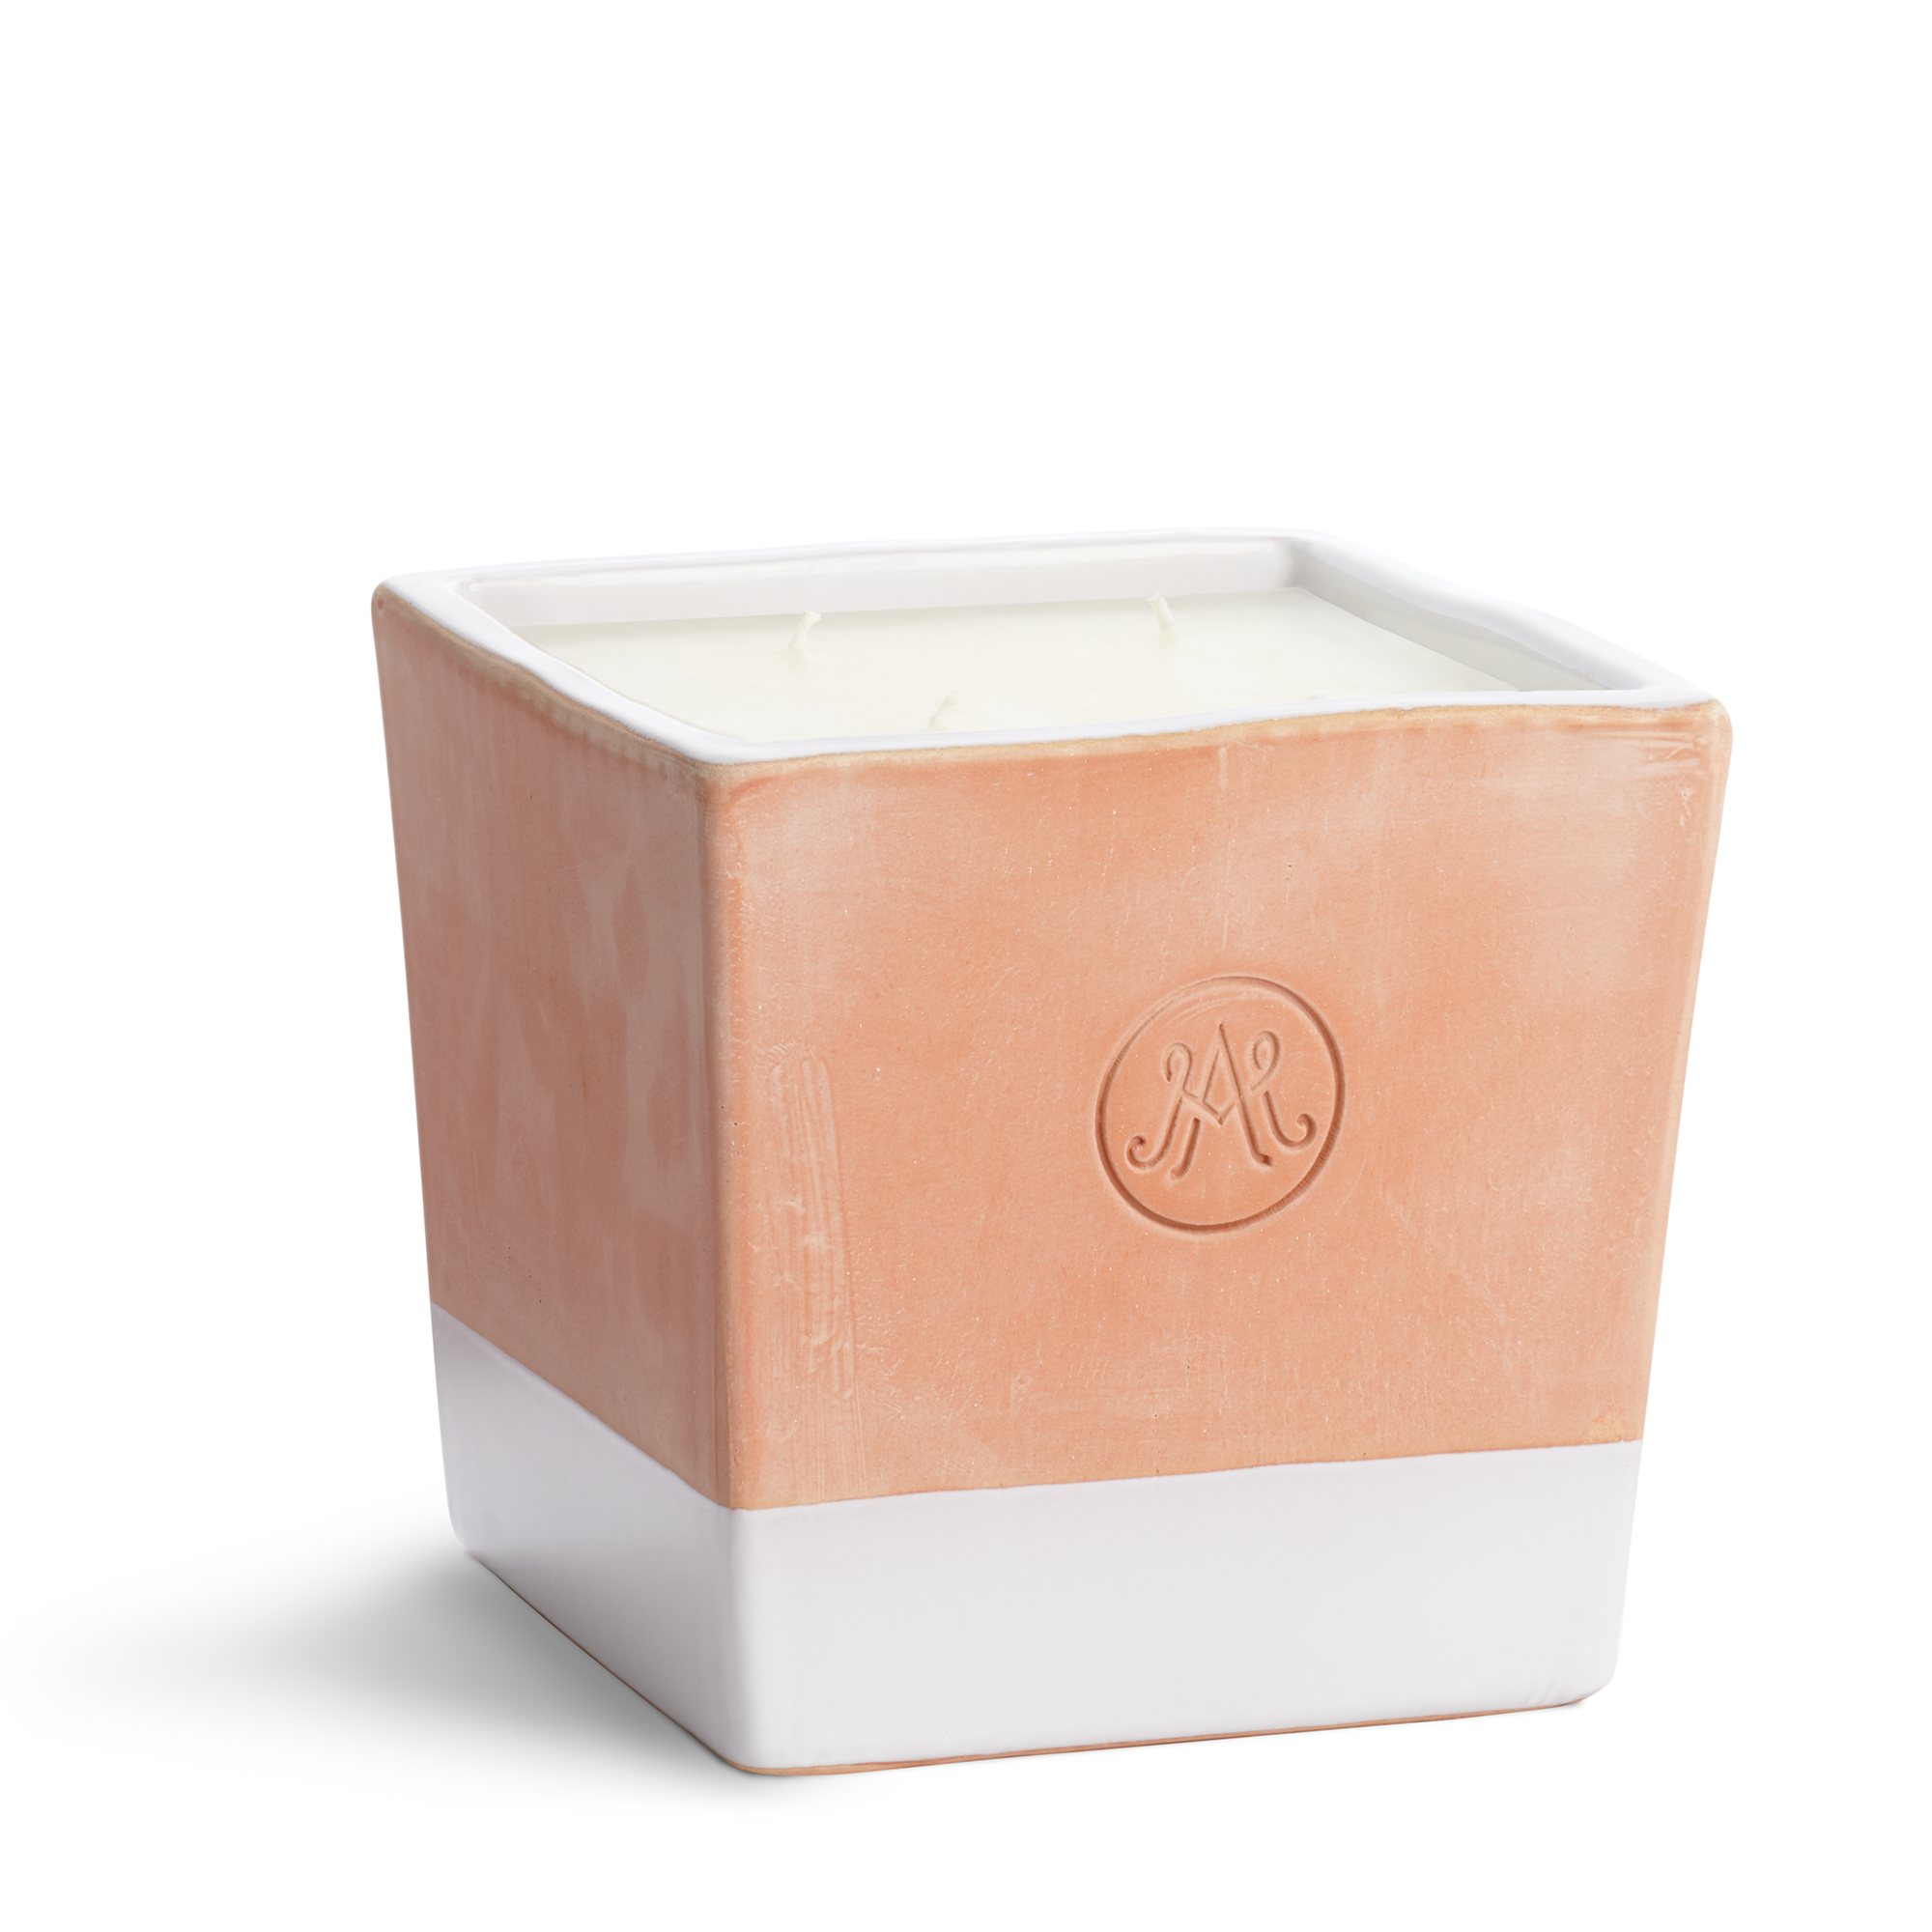 Outdoor Candle in a refillable terracotta and white enamel vessel, scented with peonies and hints of freesia and cherry branches.